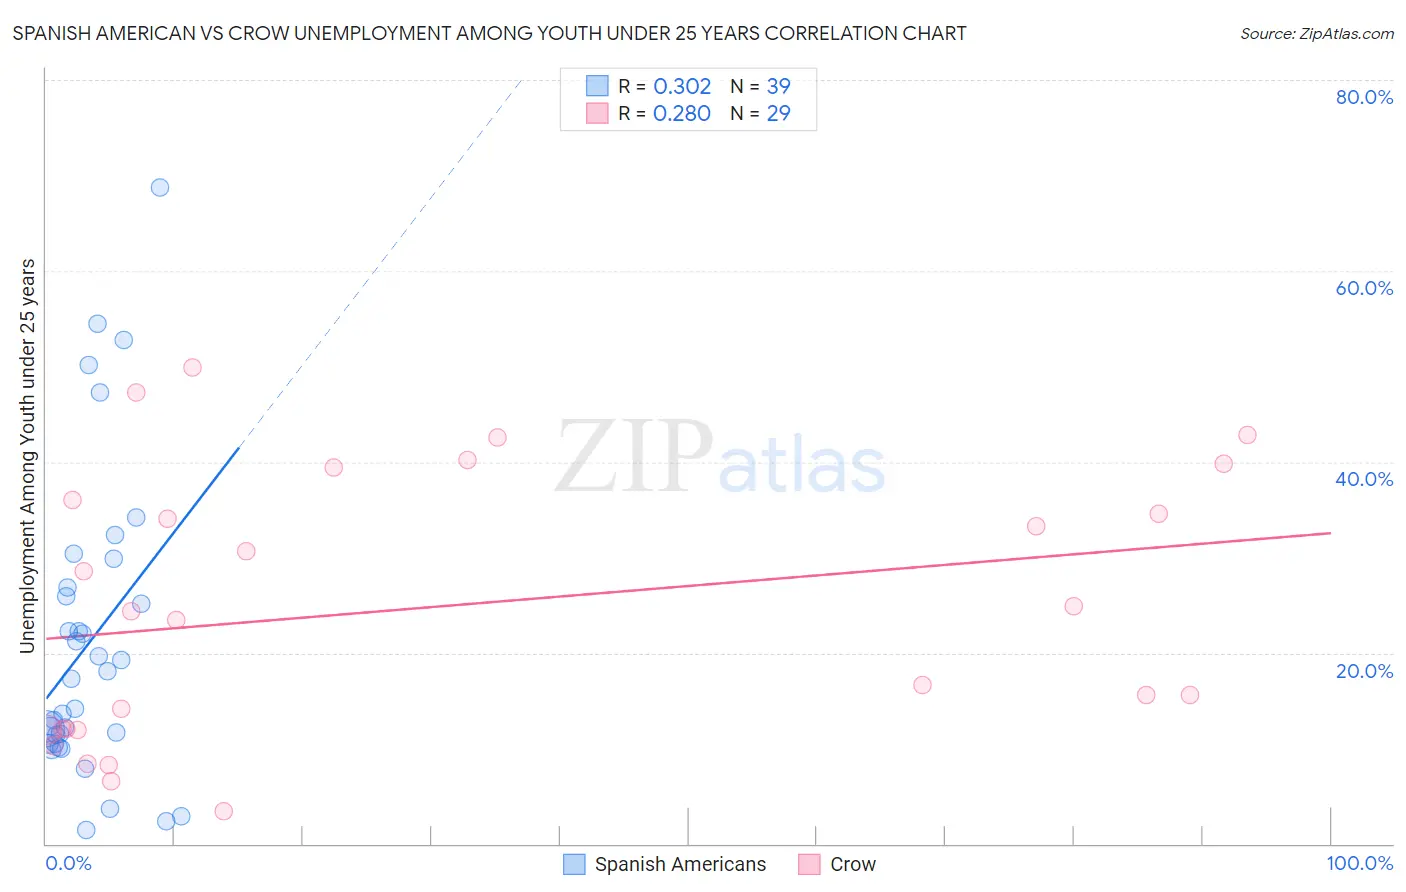 Spanish American vs Crow Unemployment Among Youth under 25 years